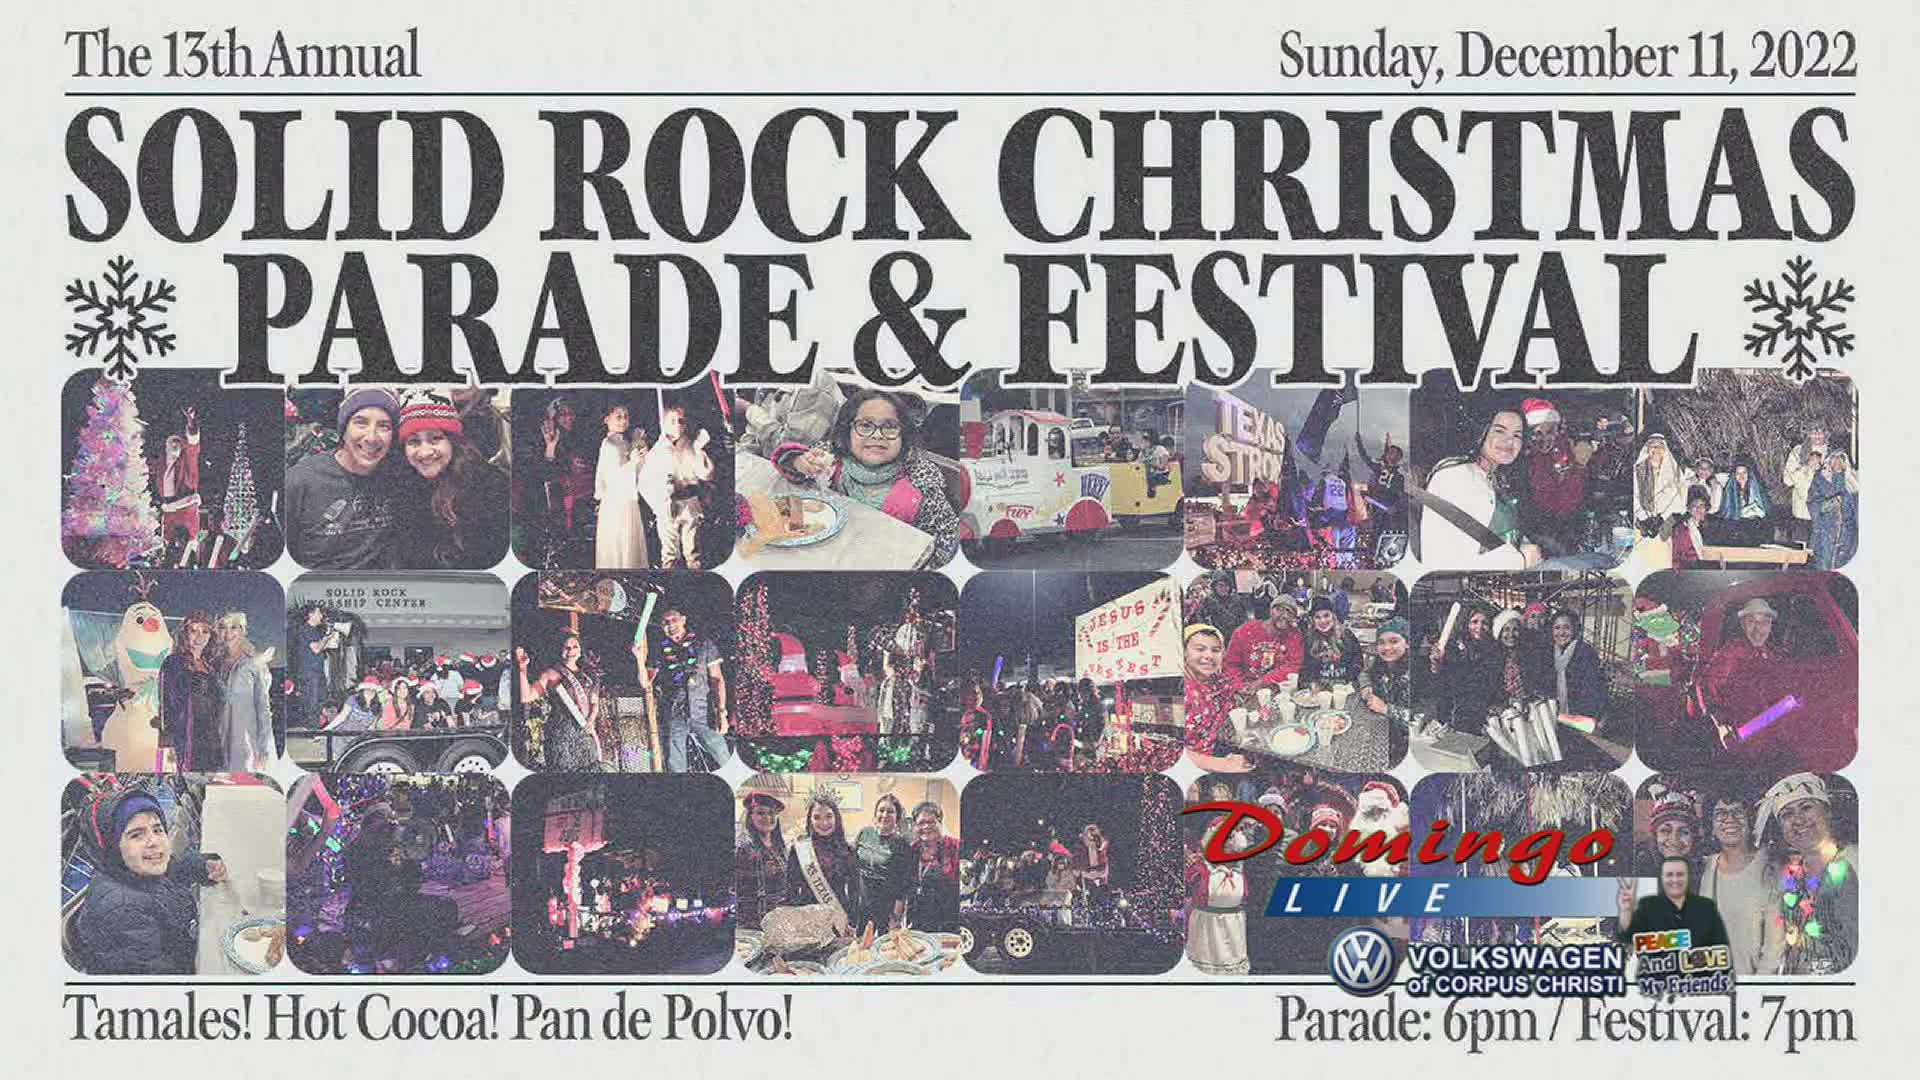 Pastor Steve Coronado of the Solid Rock Church joined us live to tell us about the church's Christmas parade, festival and toy drive.